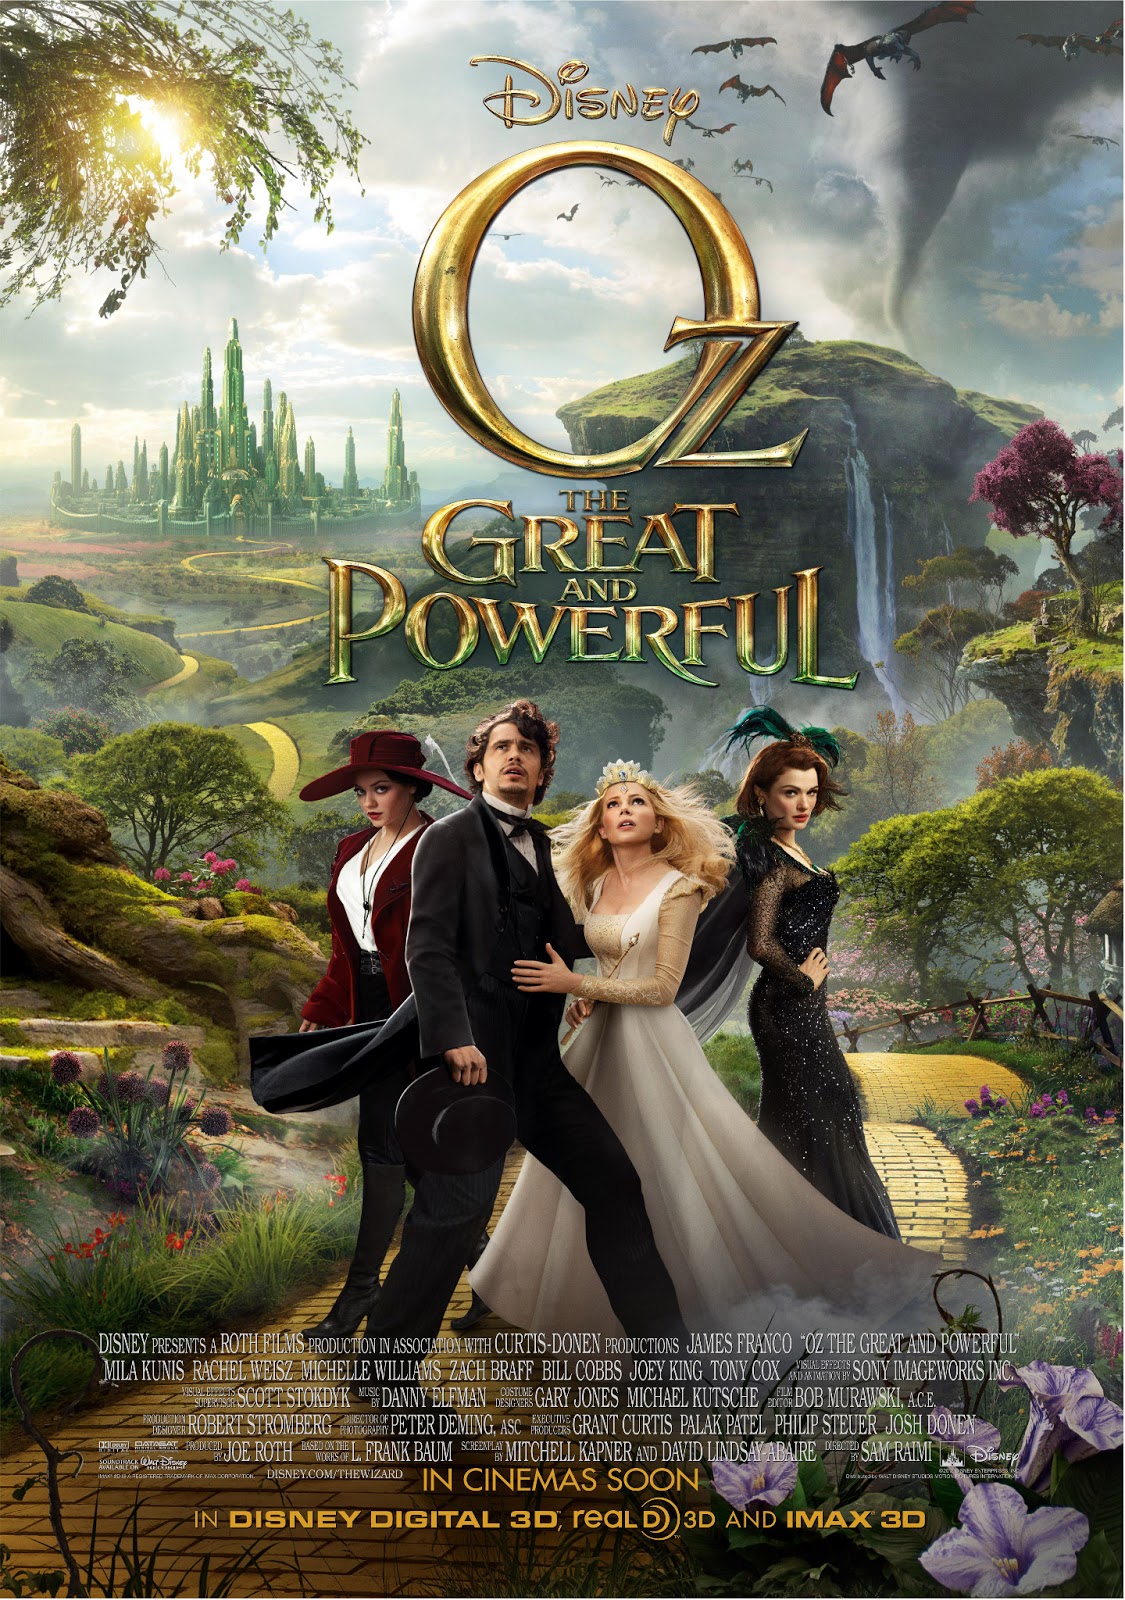 Oz the Great and Powerful 3D Review Ranting Ray's Film Reviews